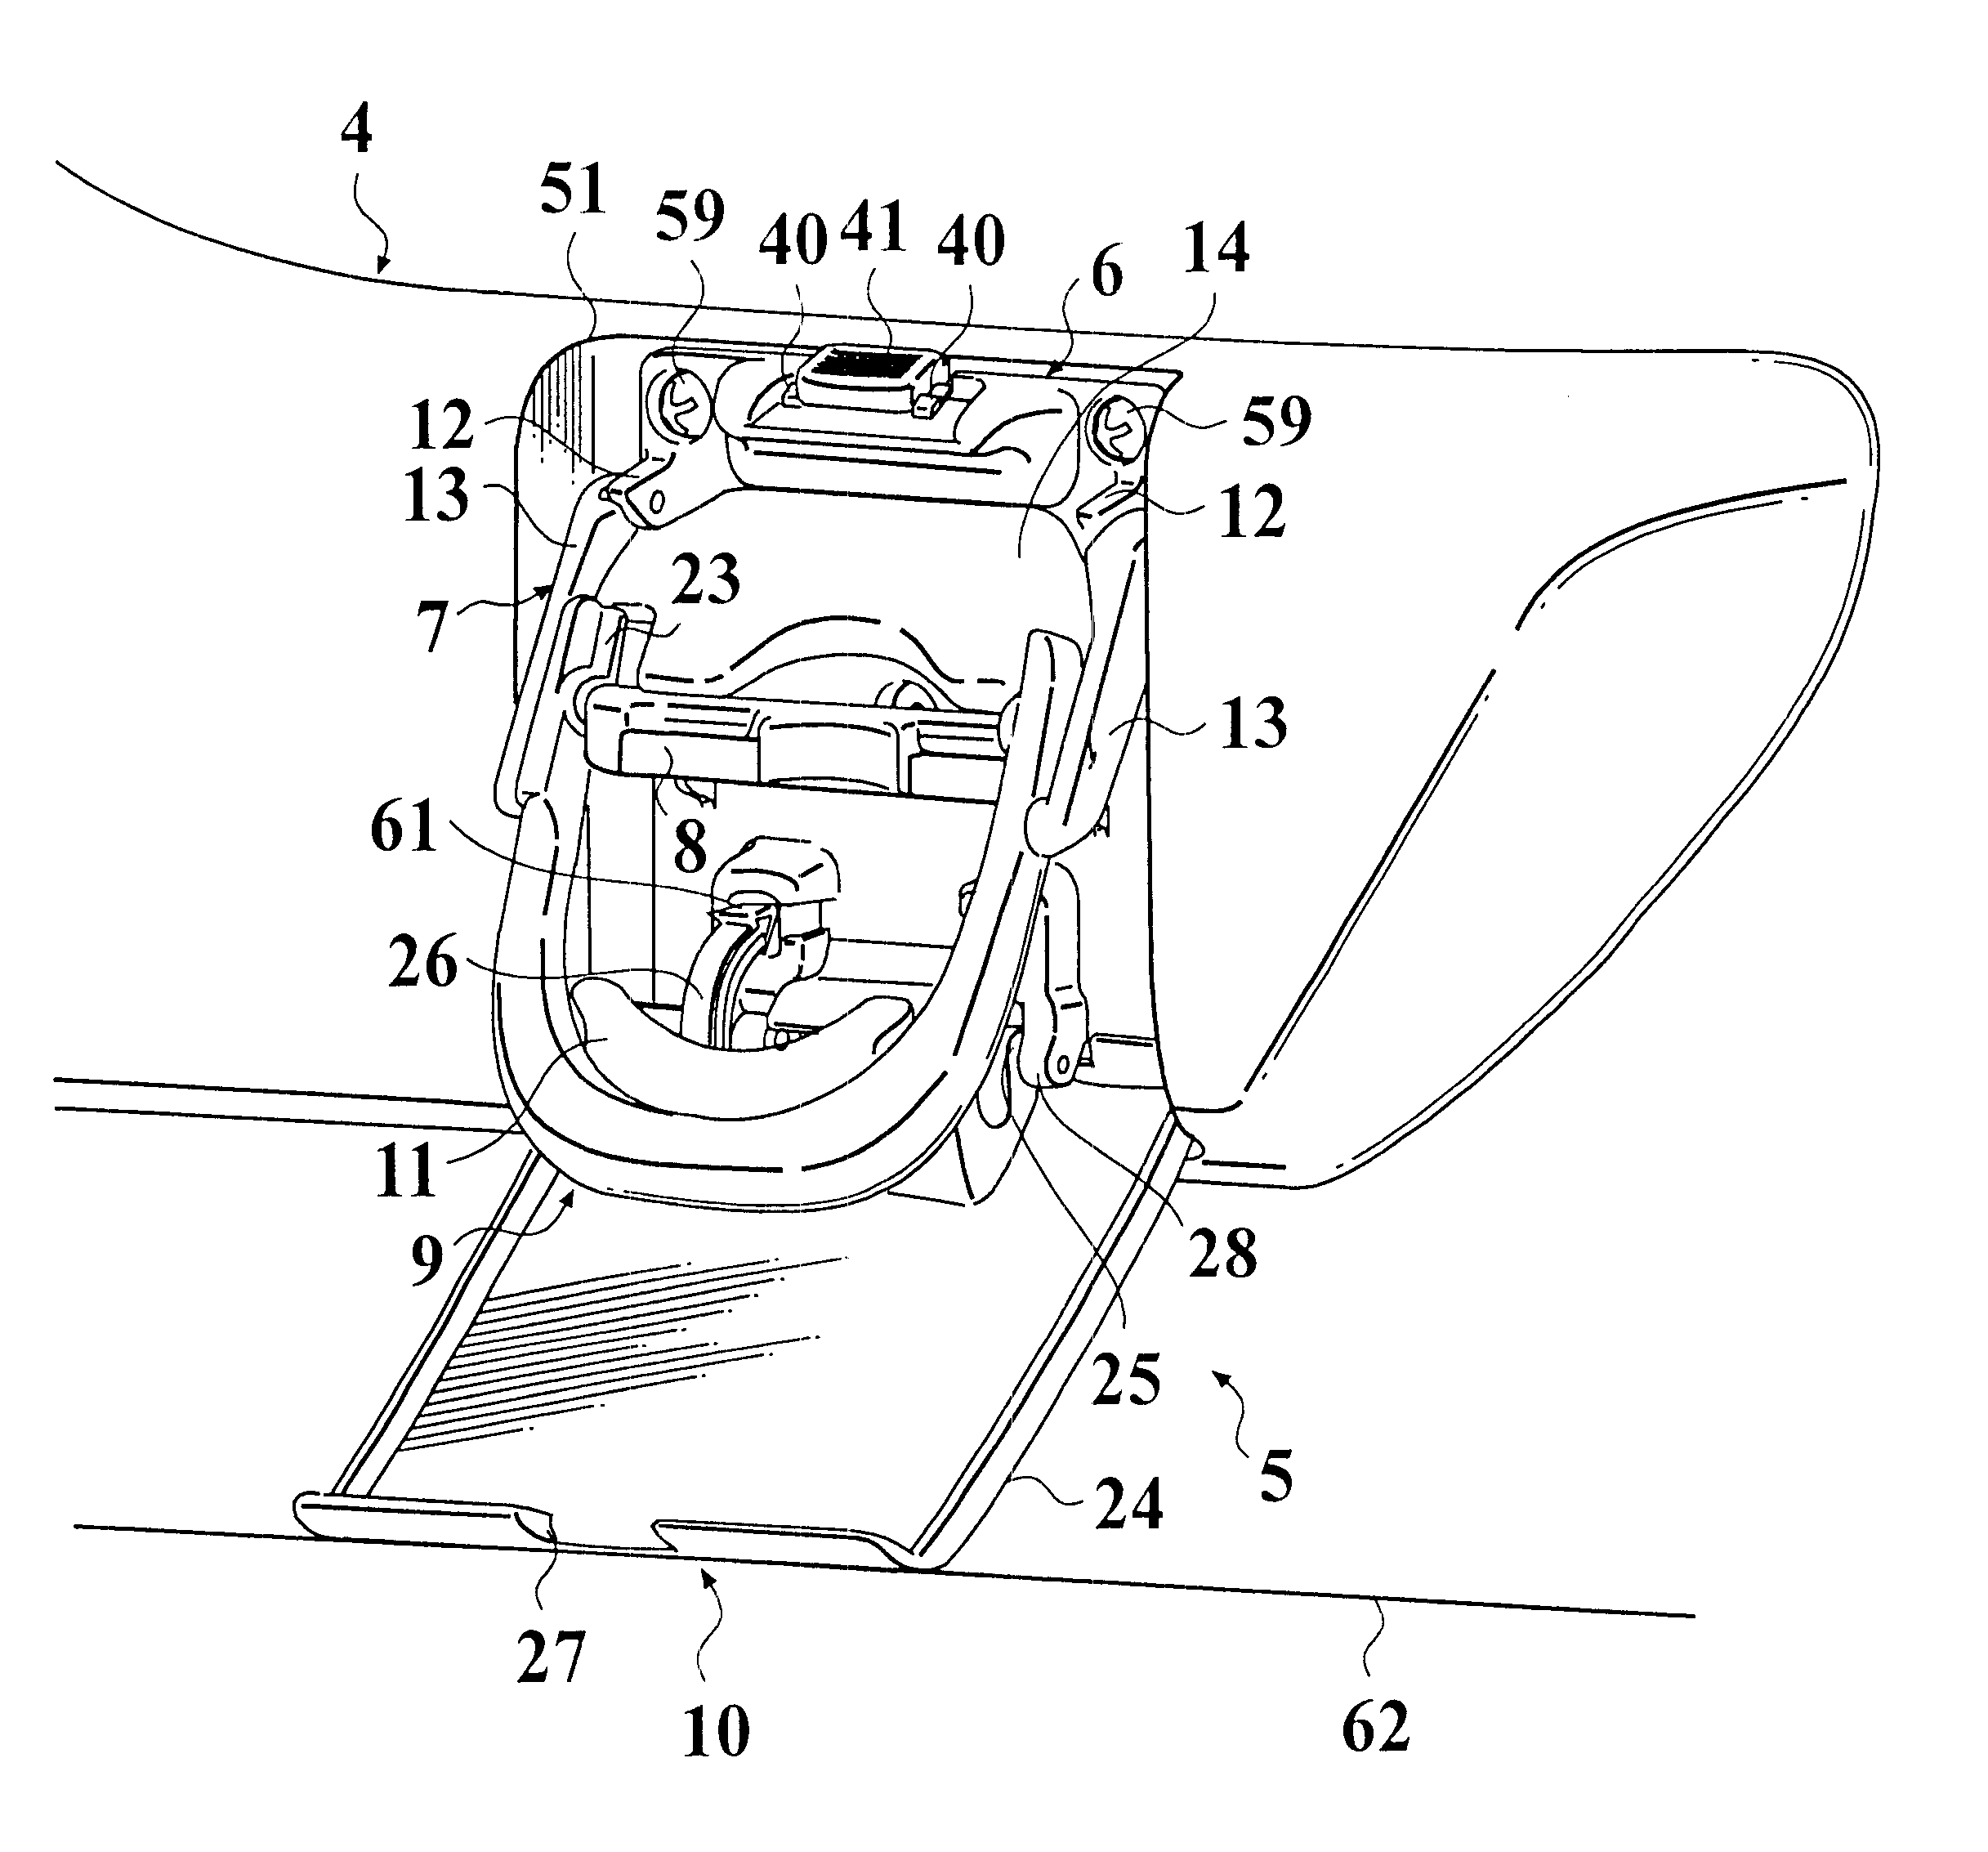 Vehicle seat having container holder